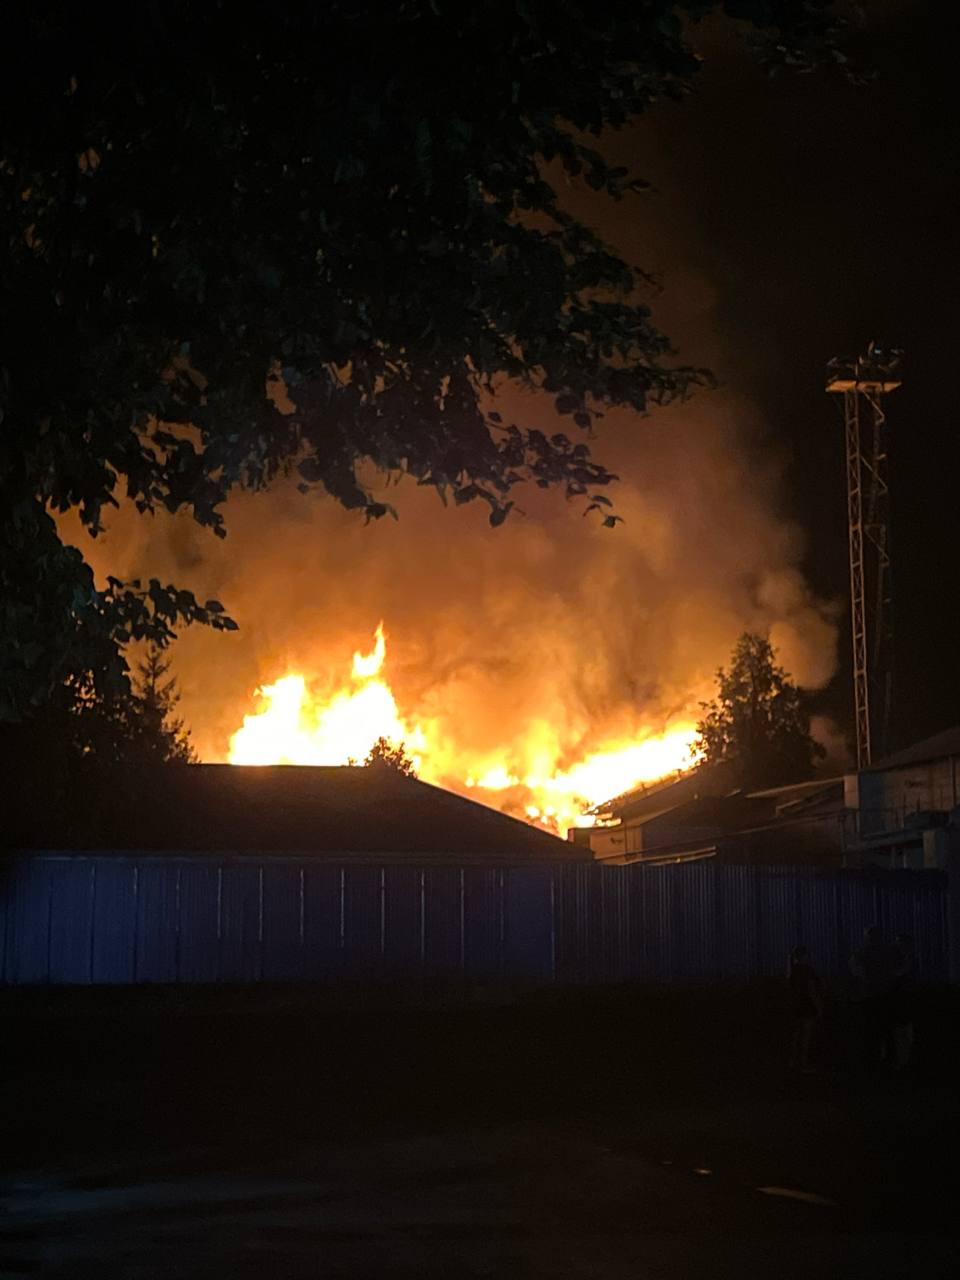 Mass fire reported at low voltage equipment plant in Kursk Oblast